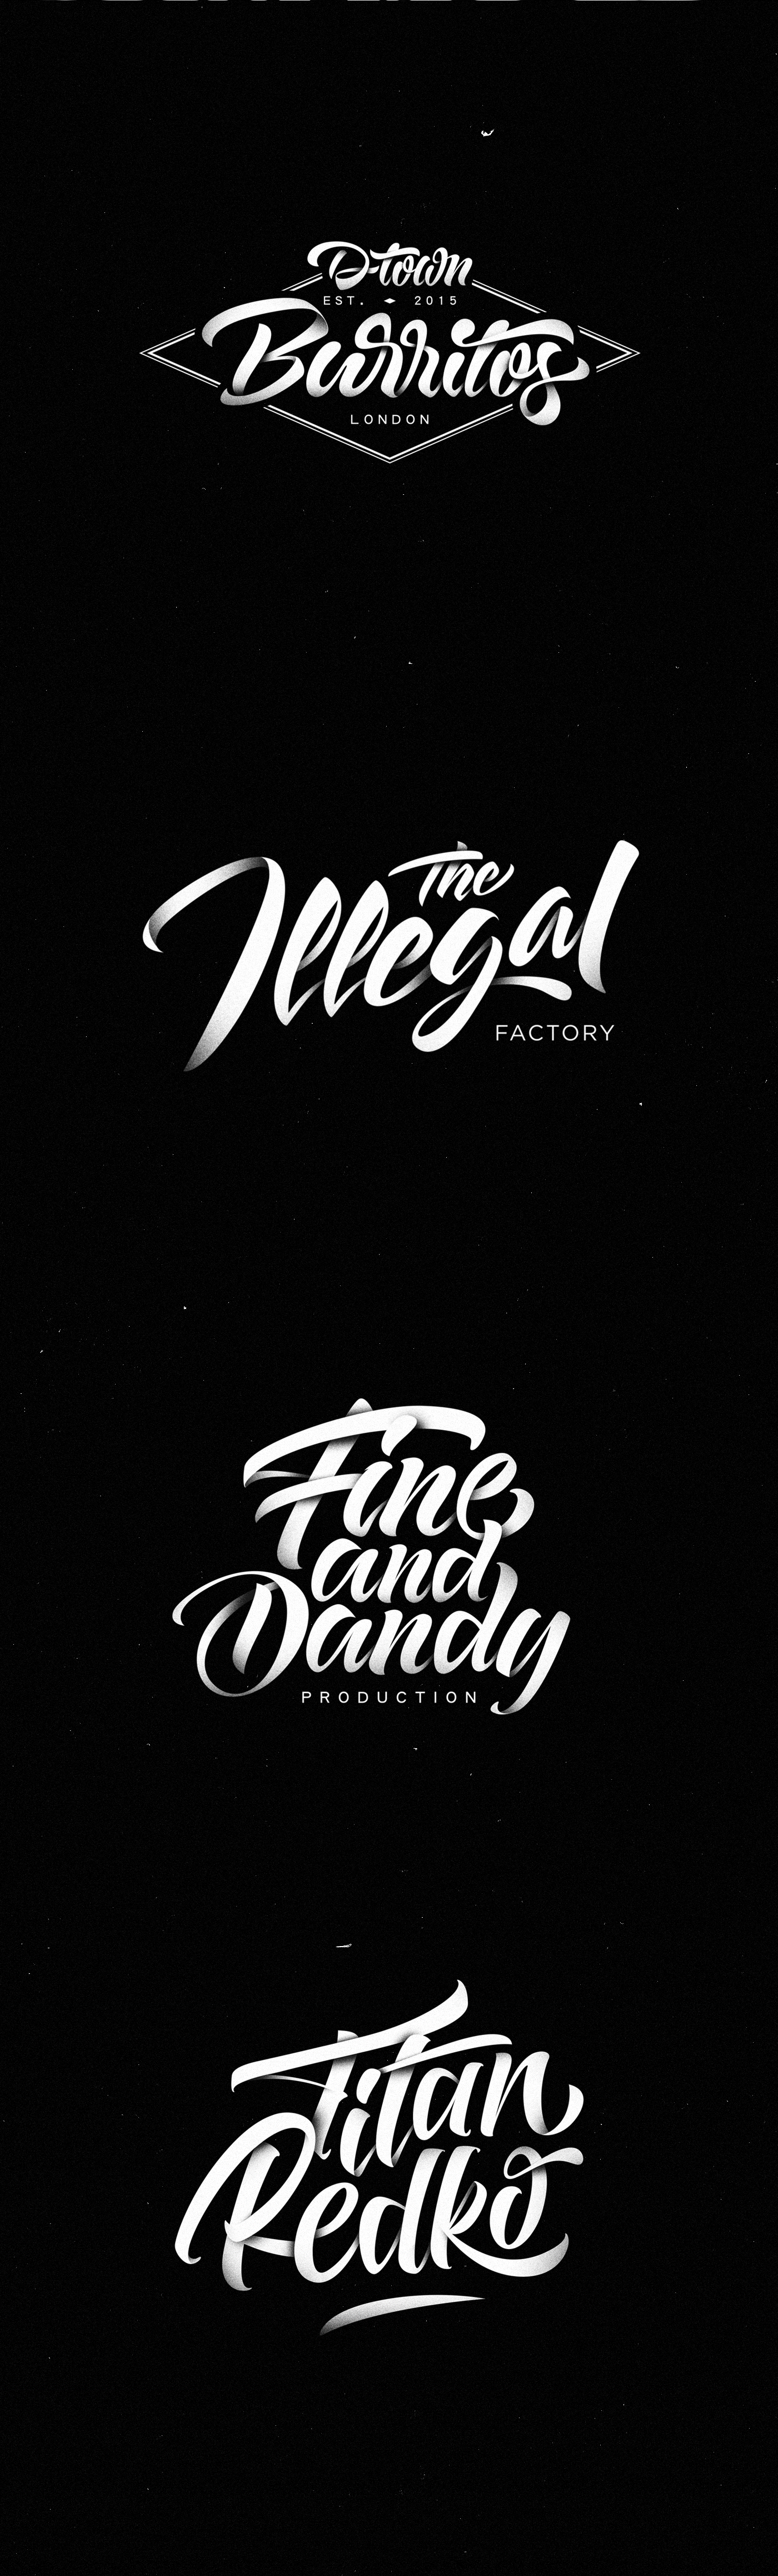 lettering Hand letterin type handtype font brush typo logo motion design Animated Logo sketches ink identity brand